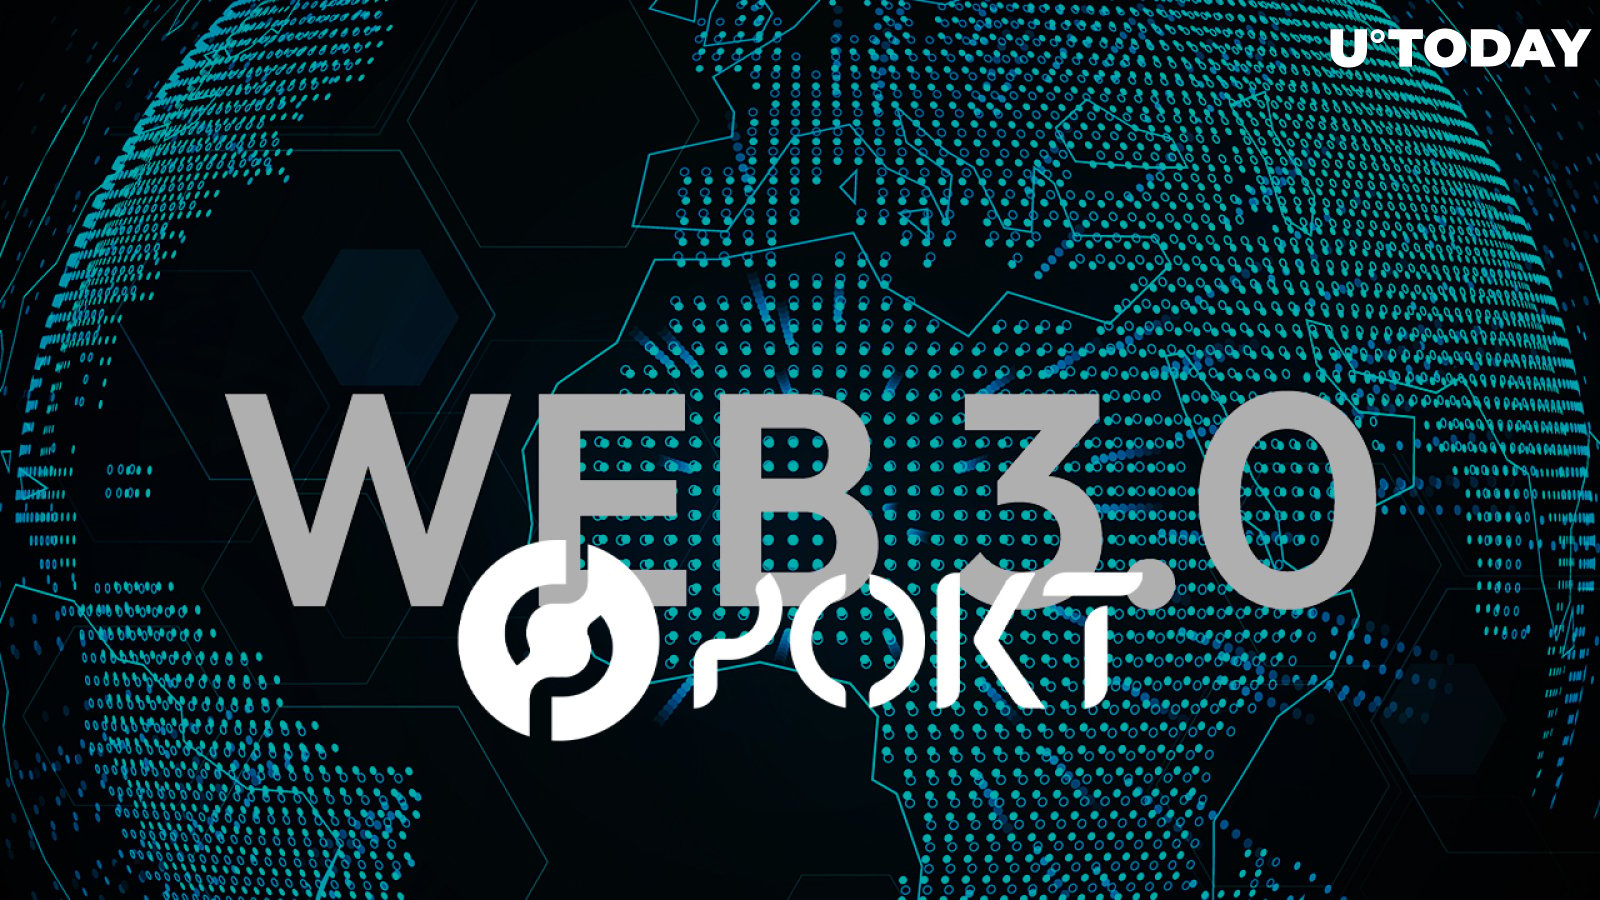 Ankr Partners with Pocket Network to Advance Decentralized Web3 Infrastructure